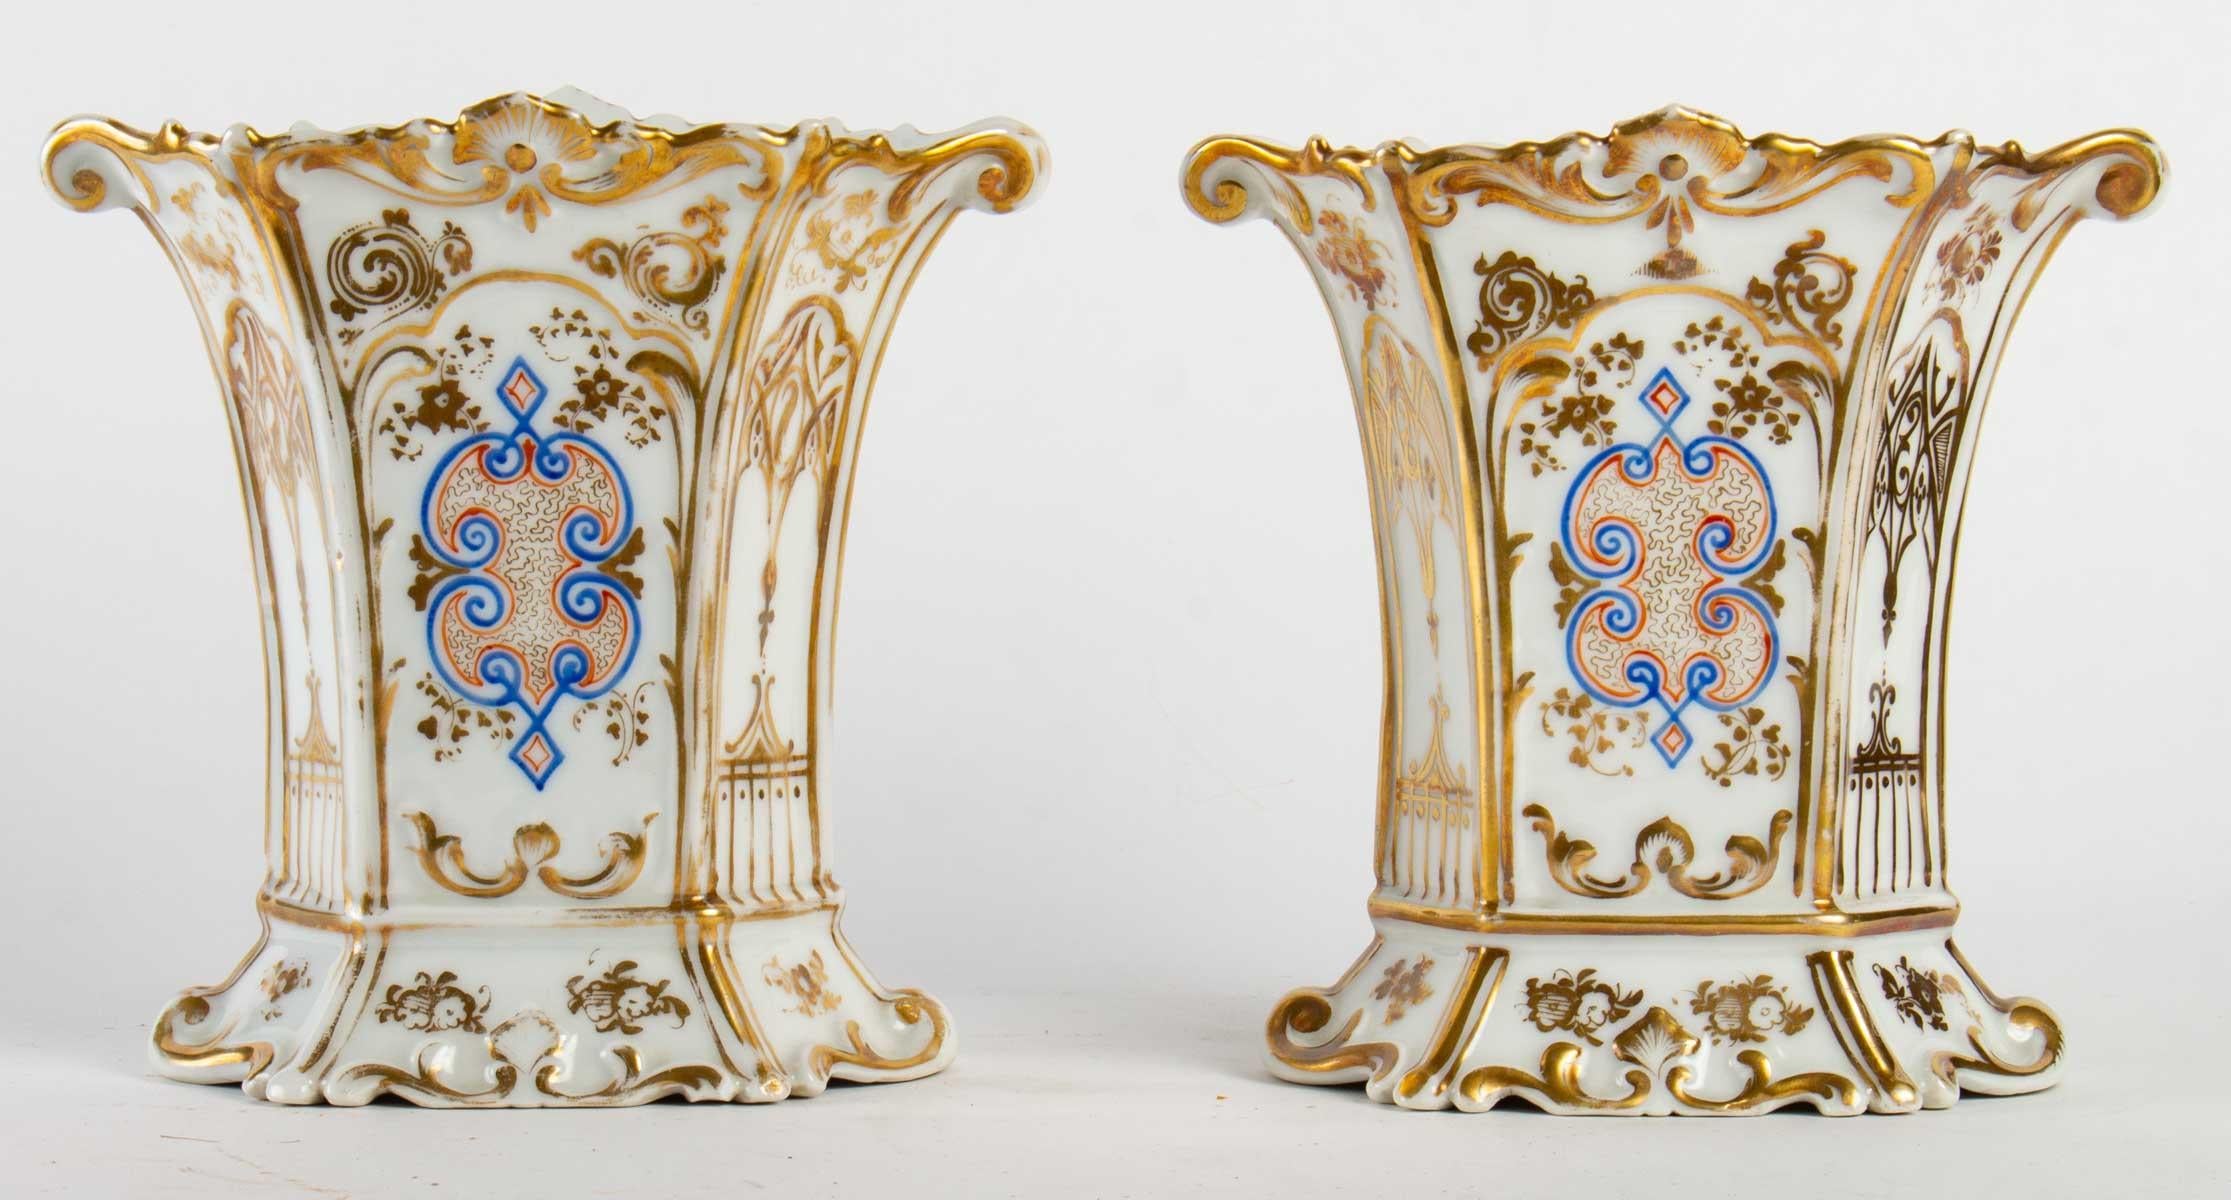 French Pair of Small Vases, Paris in the Taste of Boyeux